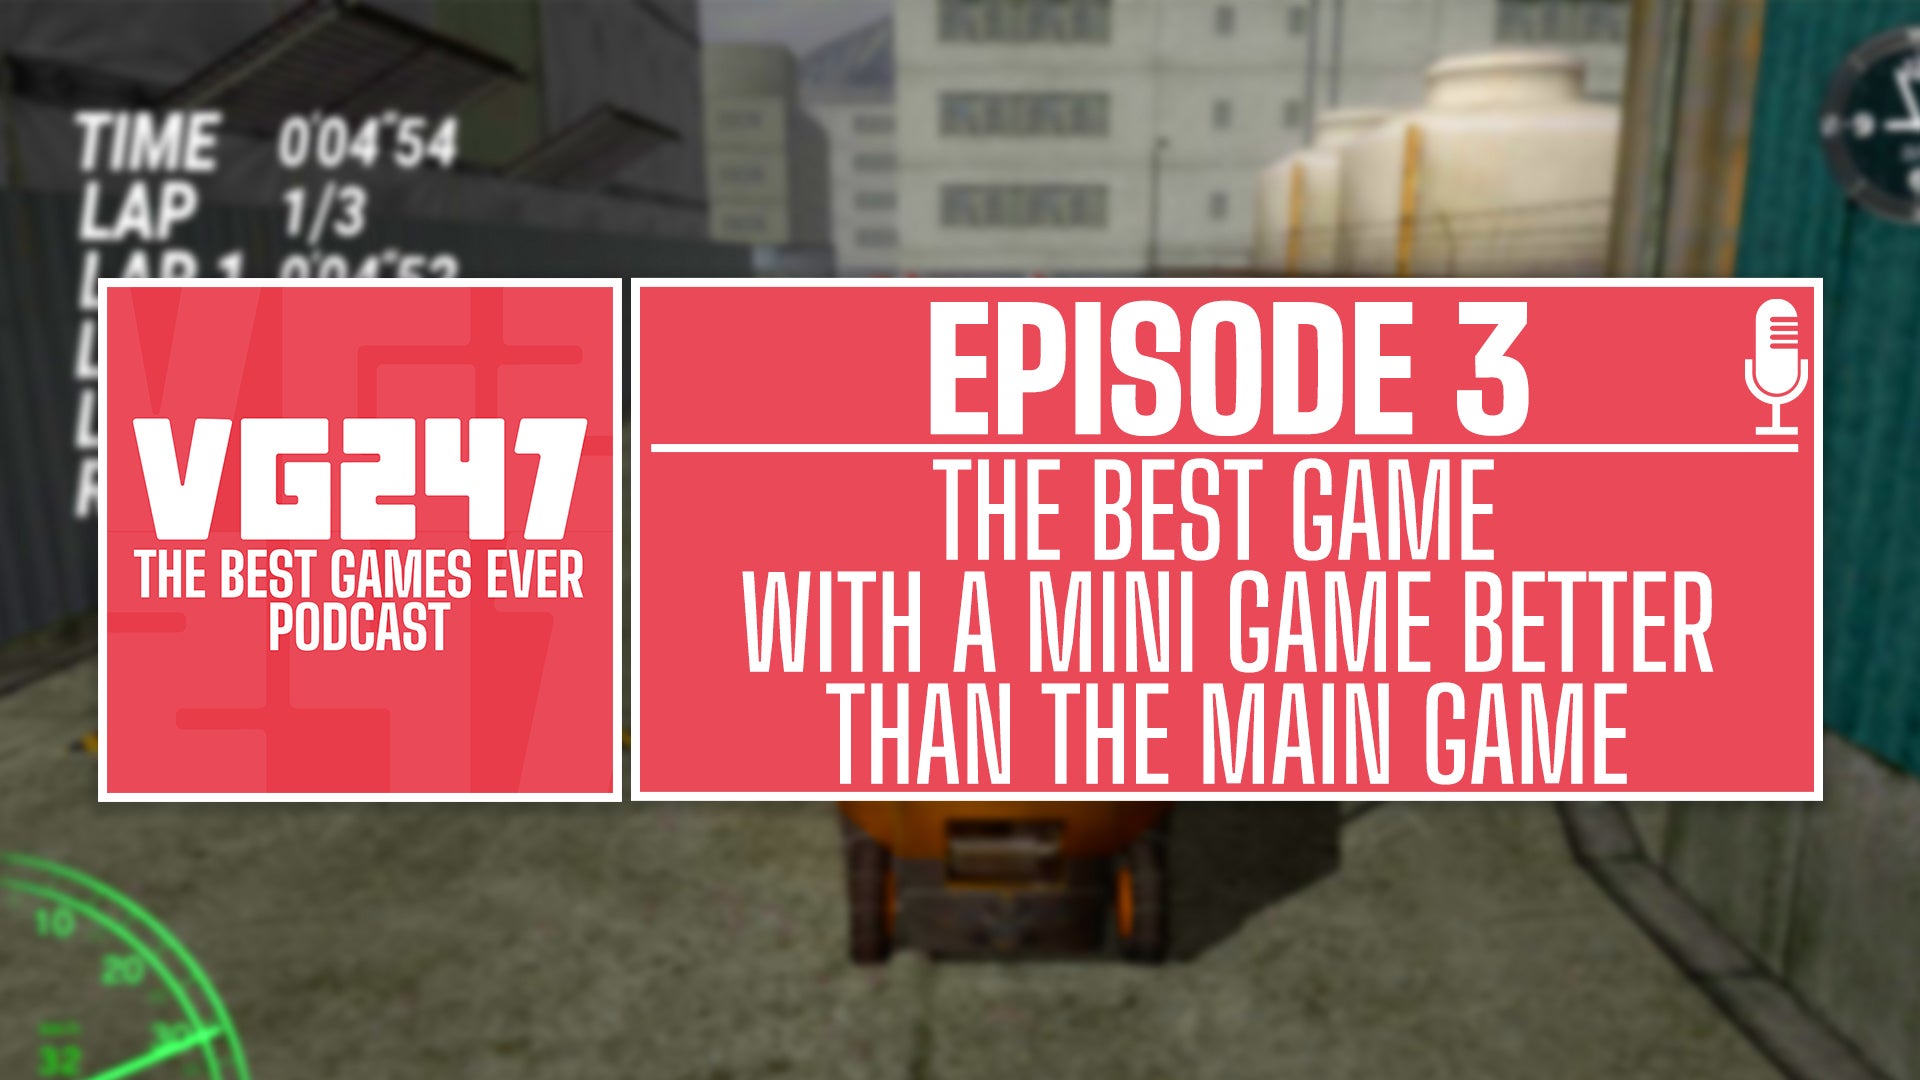 Image for VG247's The Best Games Ever Podcast – Ep.3: Best game with a mini-game better than the main game